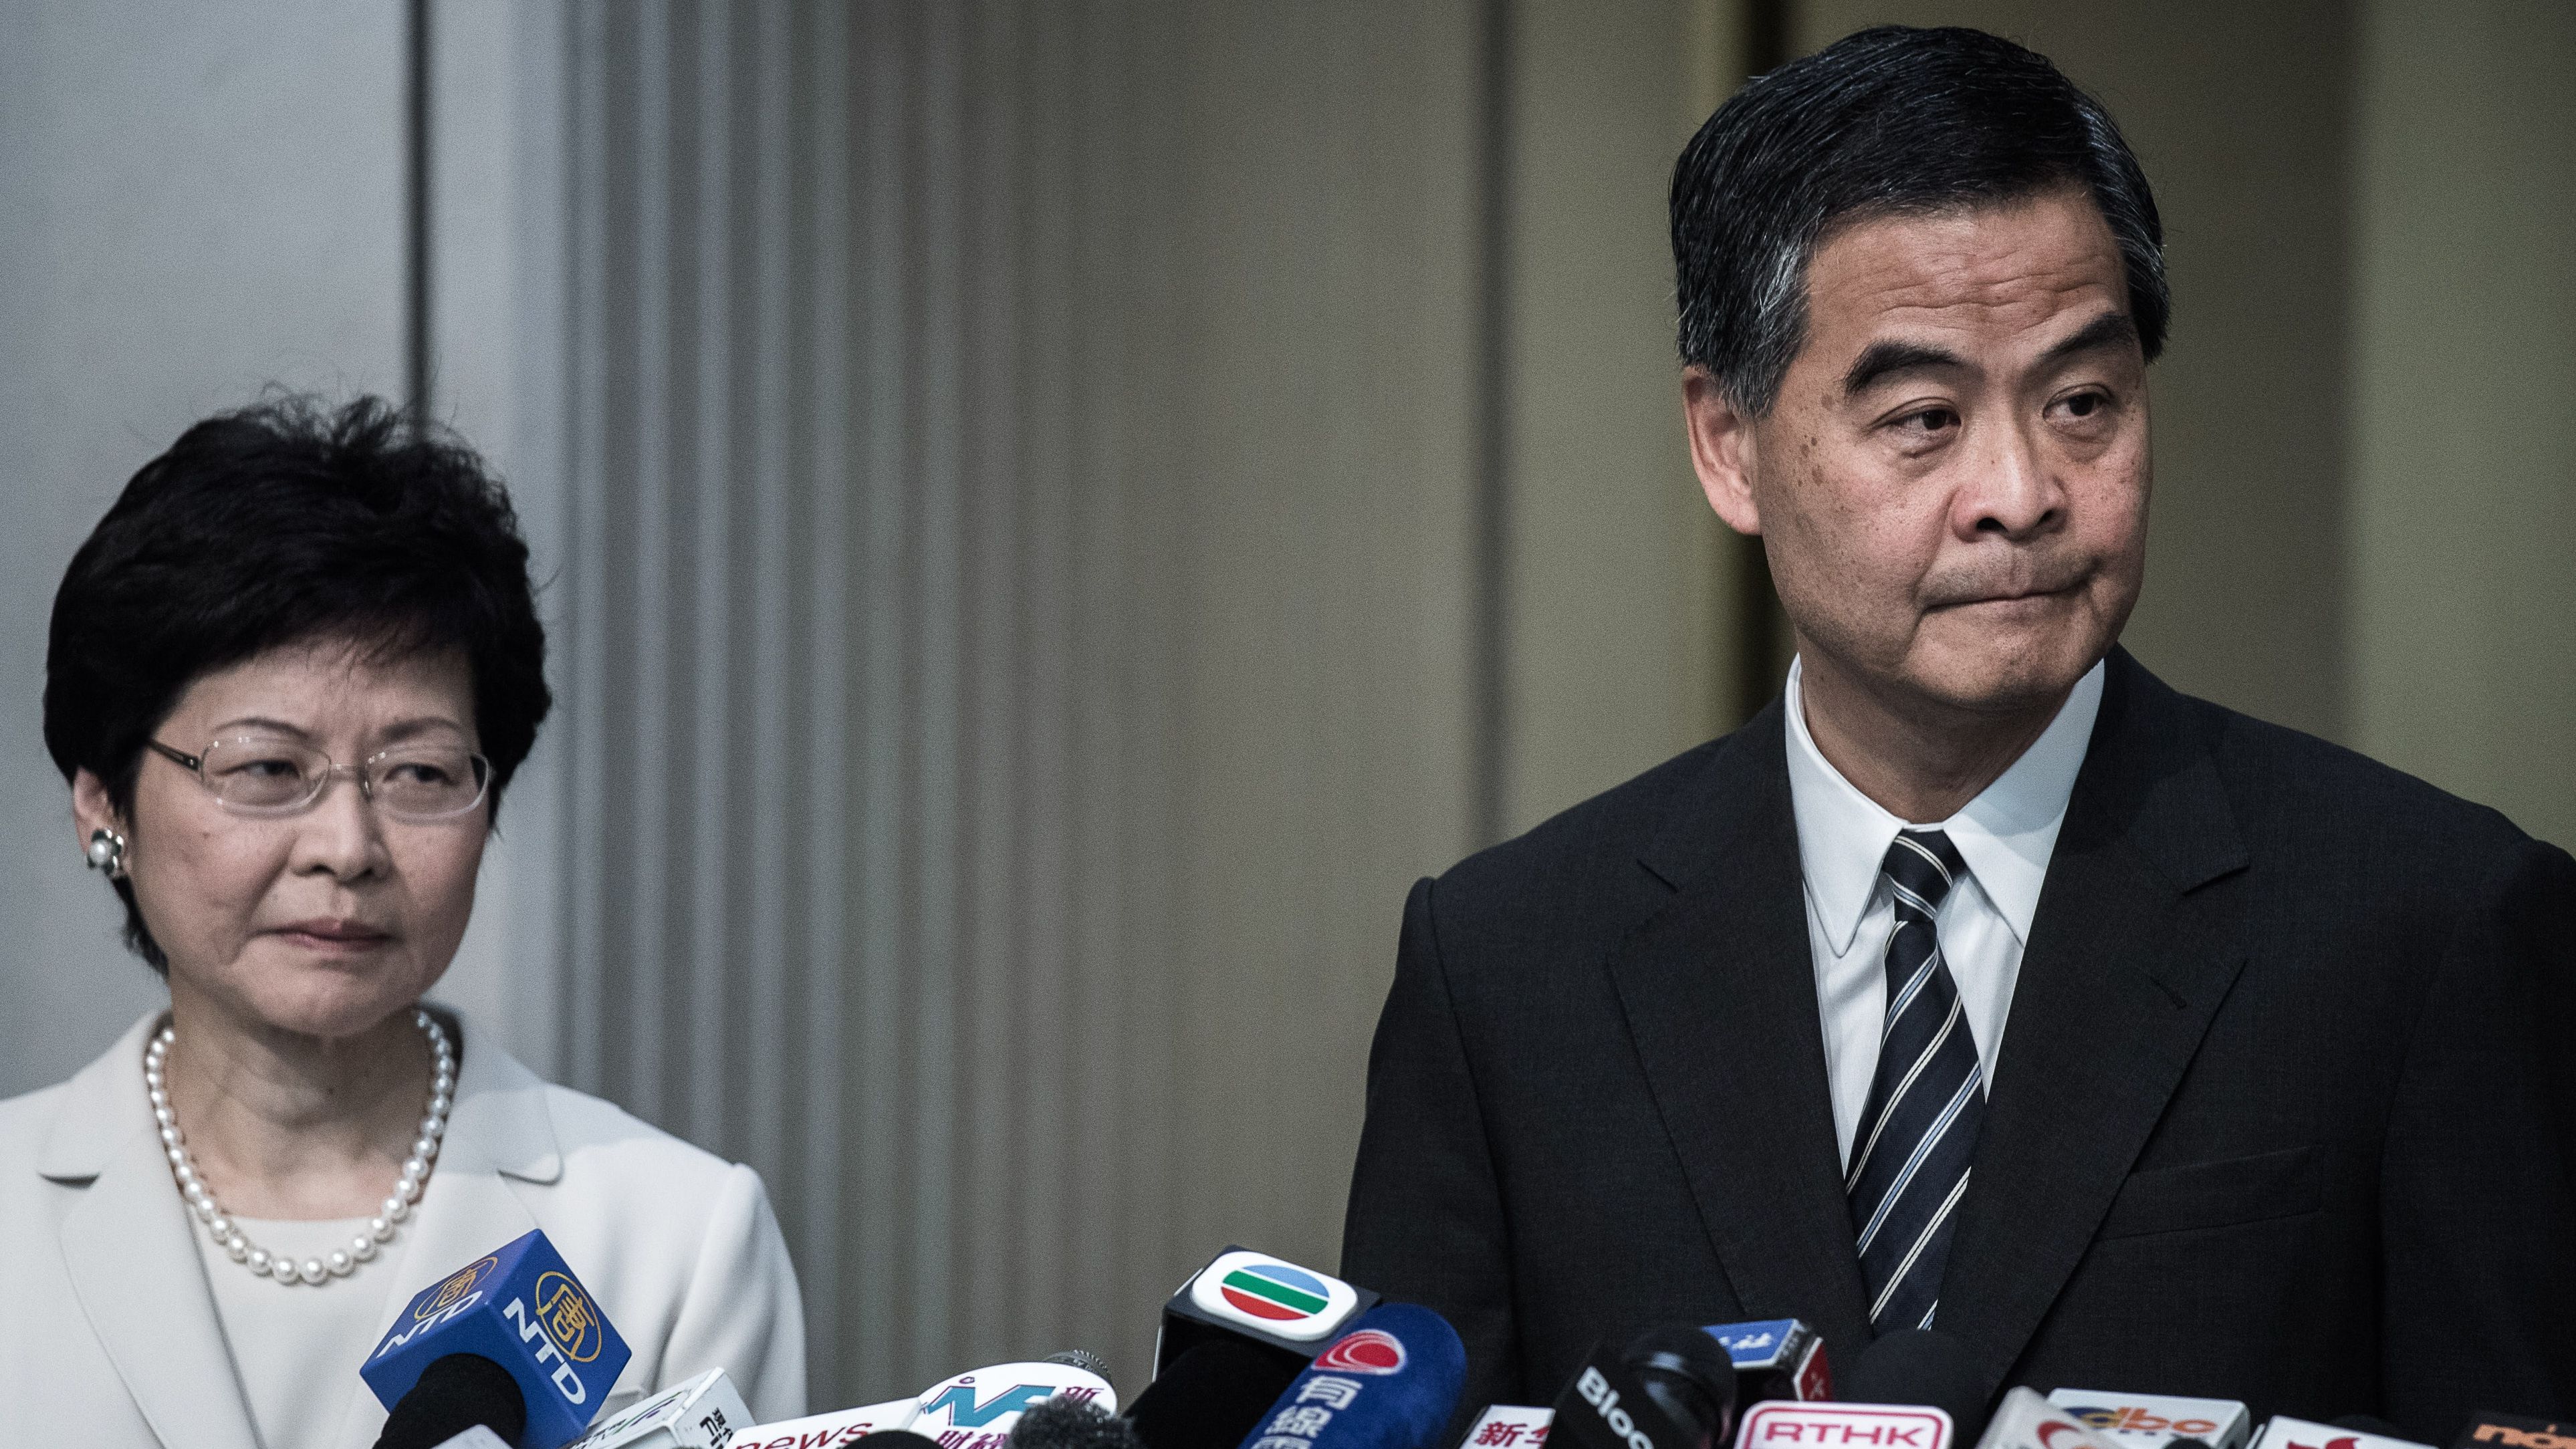 Hong Kong Chief Executive Leung Chun-ying (right) addresses a press conference next to Chief Secretary Carrie Lam (left) in Hong Kong on April 22, 2015.